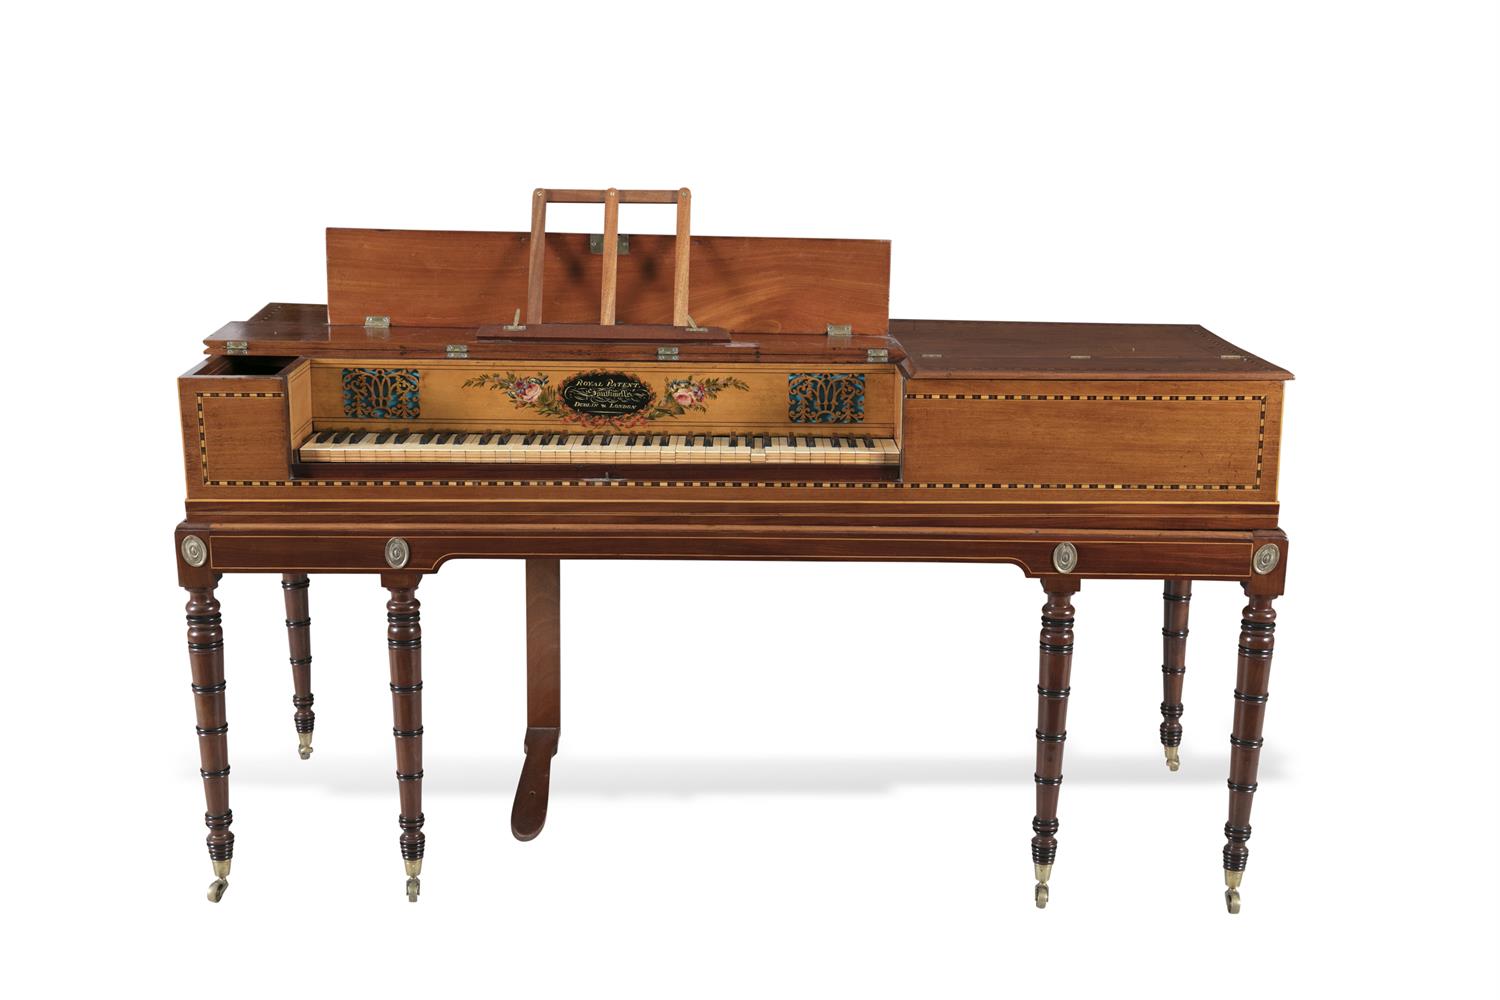 AN IRISH GEORGE III INLAID MAHOGANY AND SATINWOOD SQUARE PIANO, the case decorated with checkered